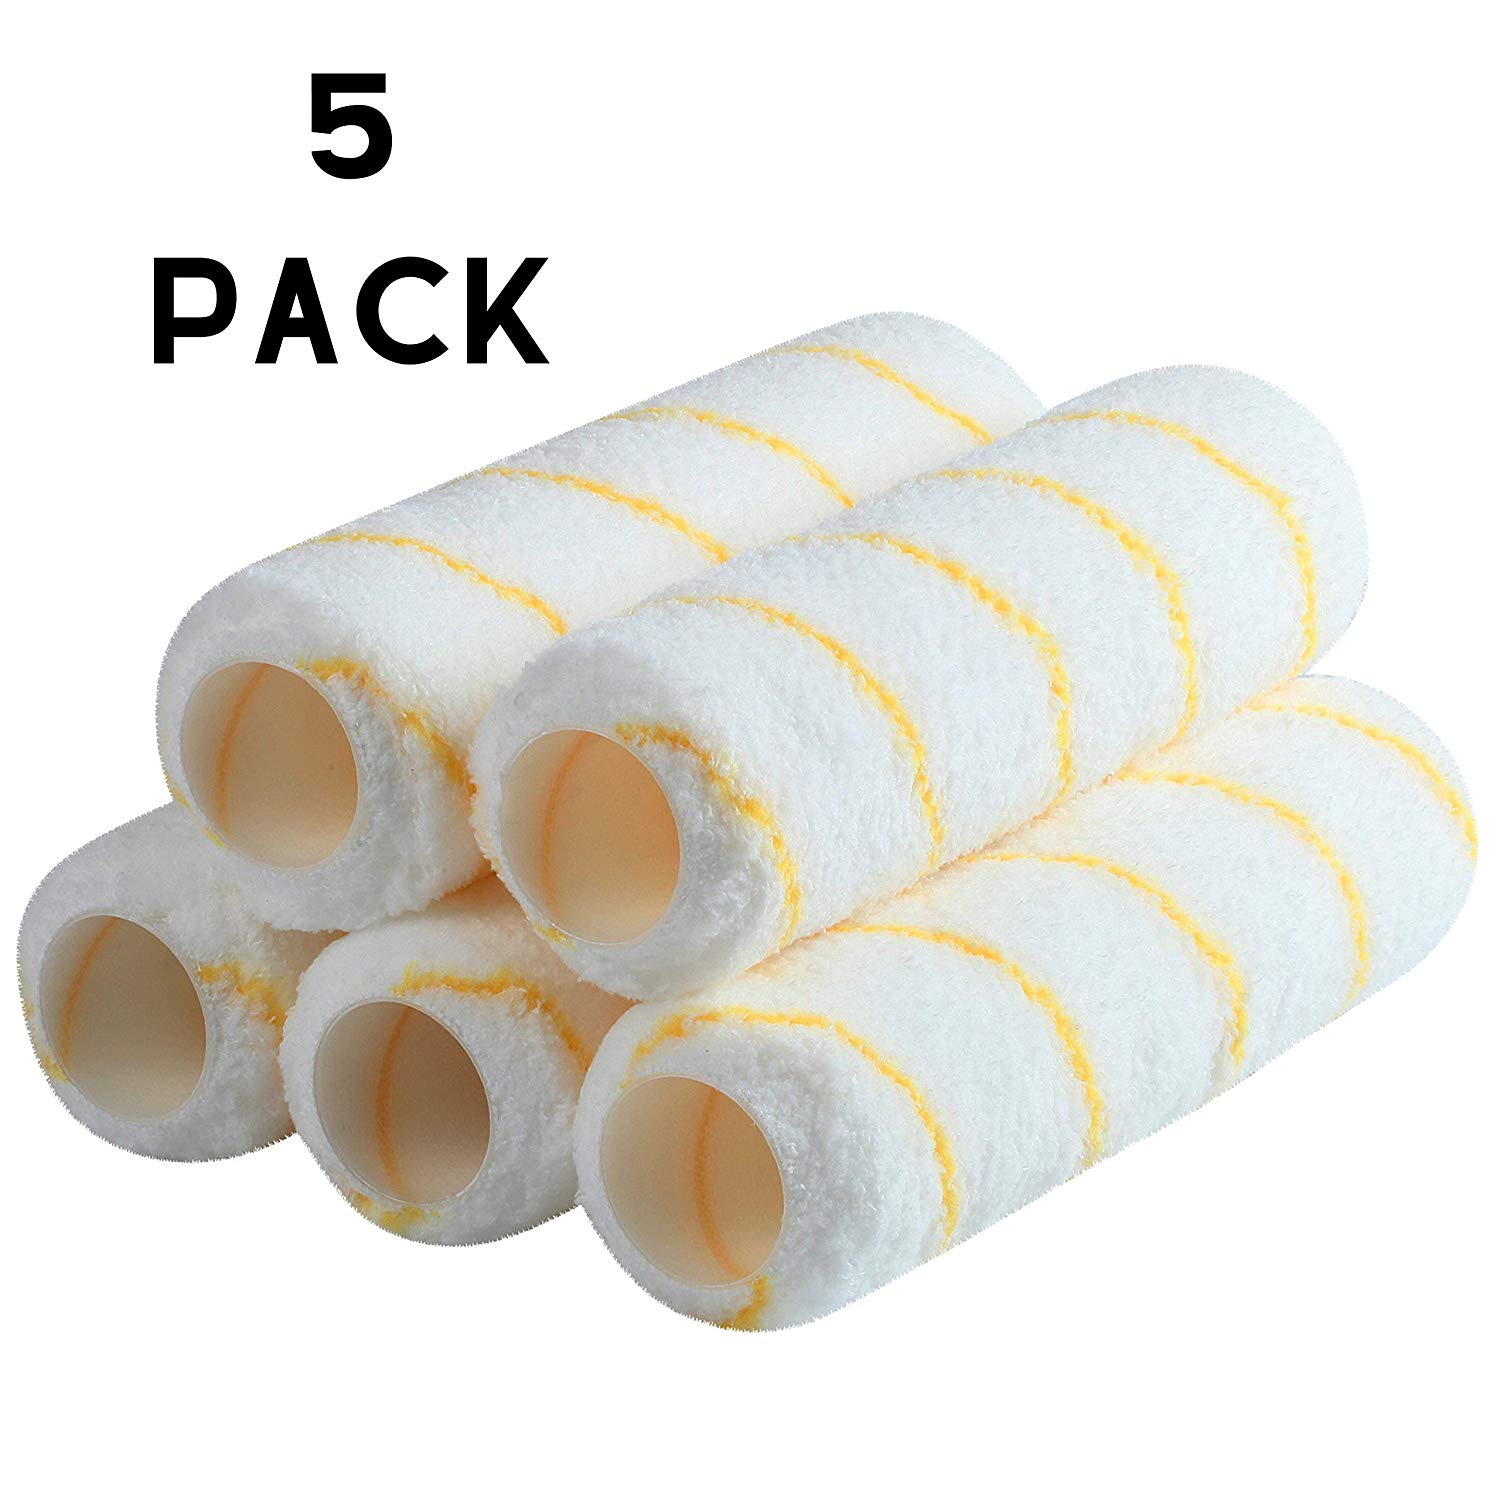 Bates- Paint Roller Covers, 9 Roller Covers, Pack of 5, Covers for Paint  Rollers, Naps for Paint Roller Brush - Bates Choice